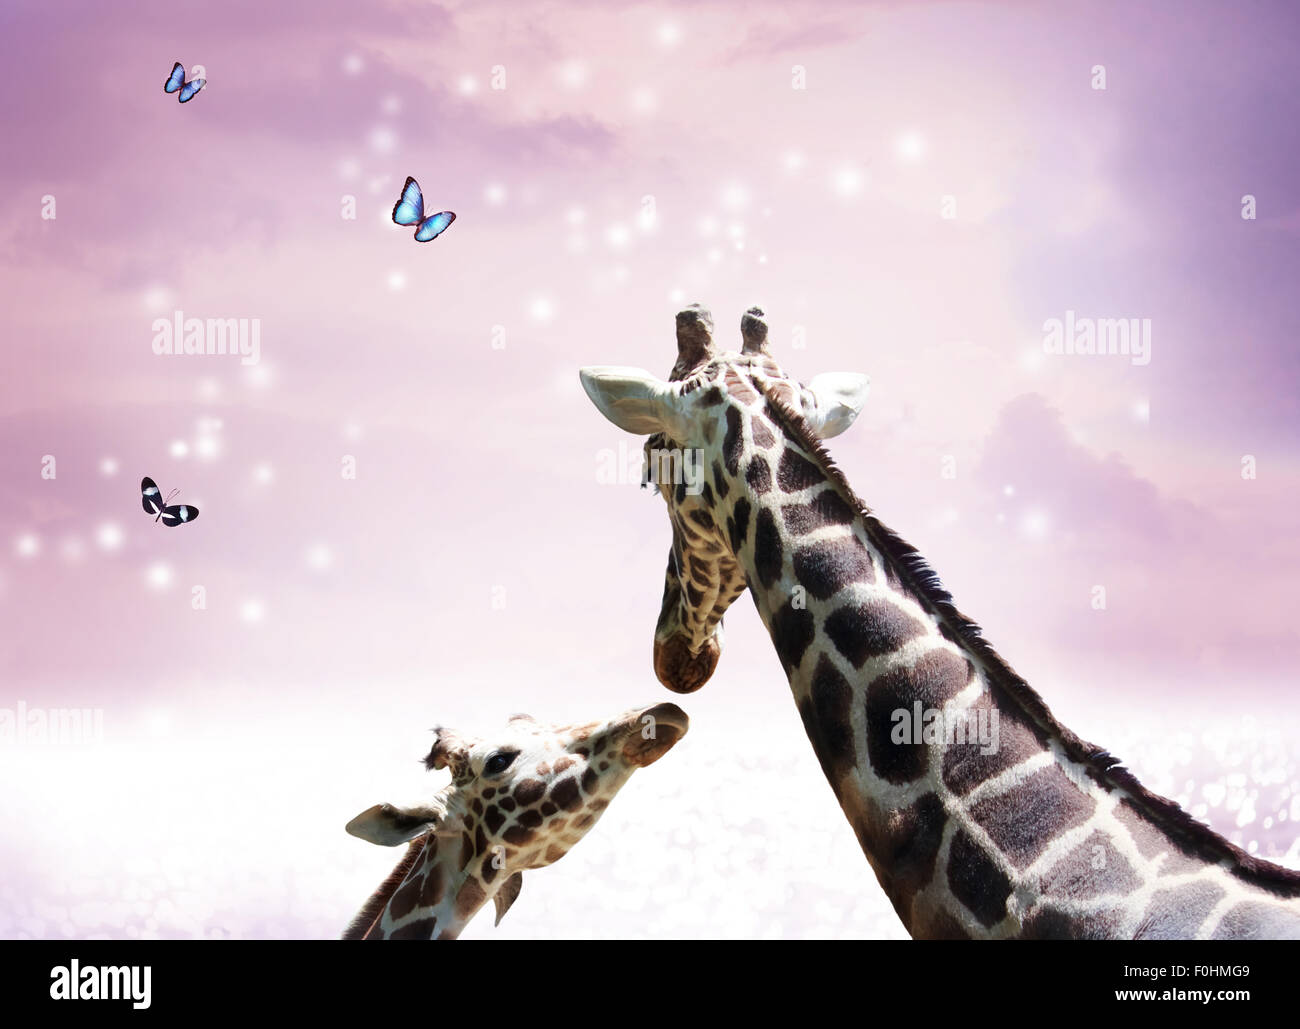 Two Giraffes, mother and child in friendship or love theme image at twilight Stock Photo